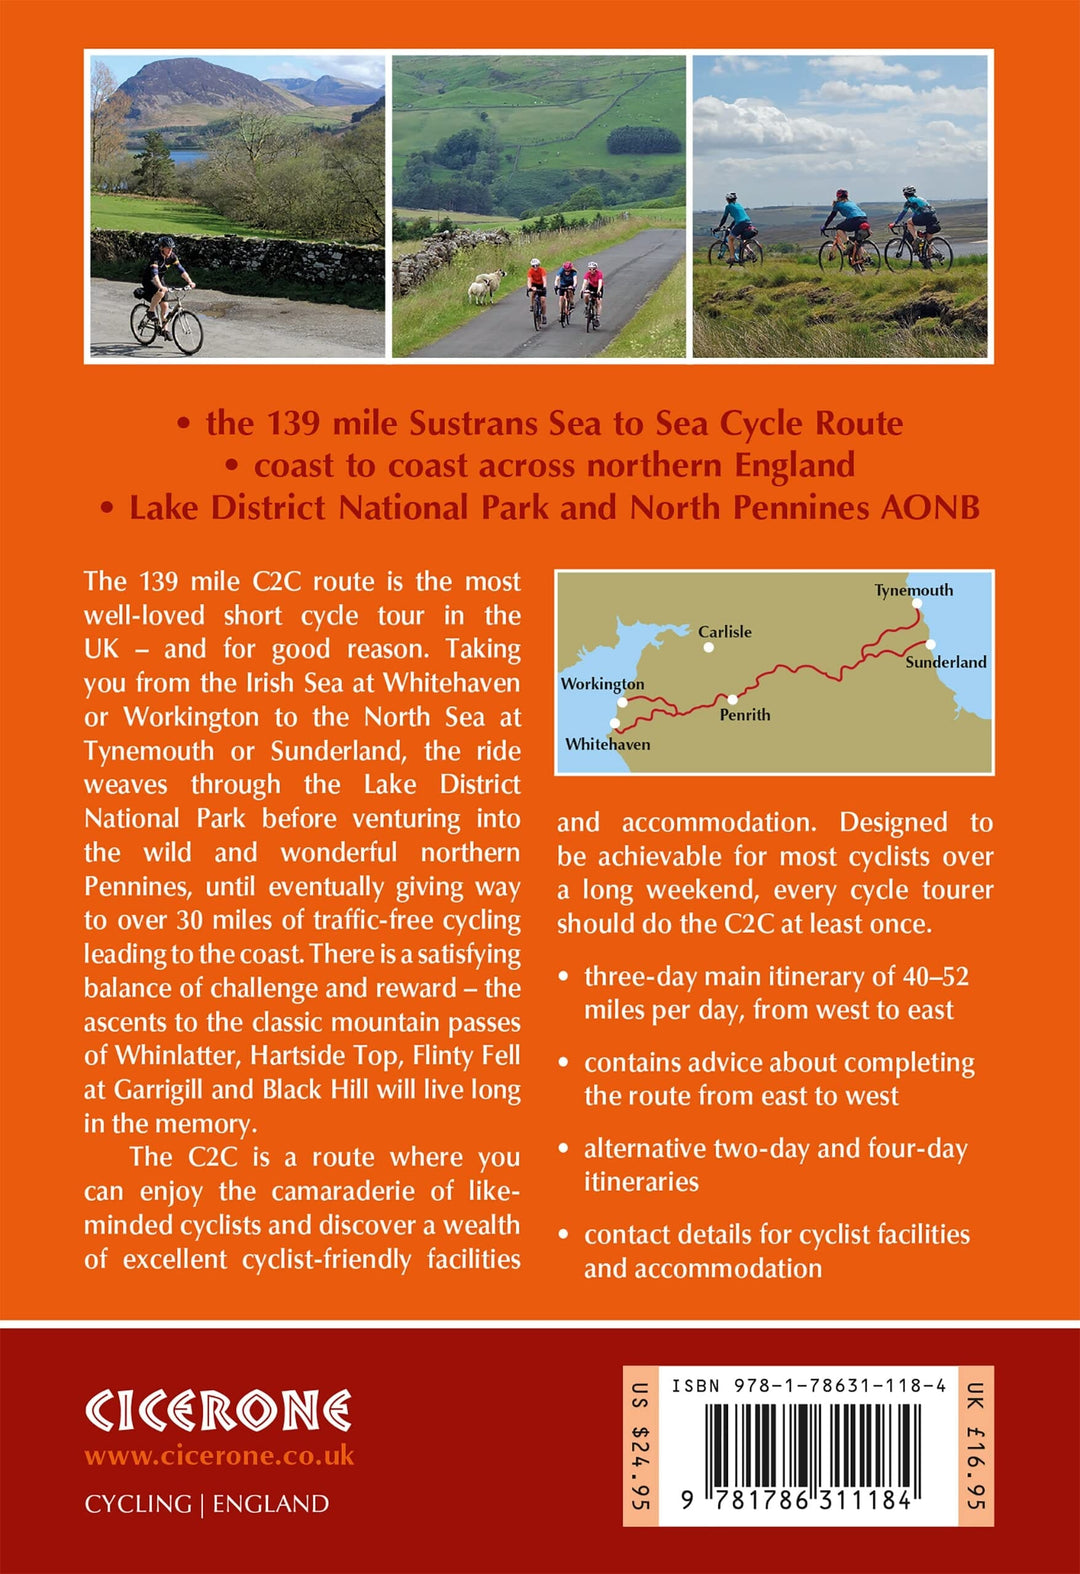 Guide vélo (en anglais) - Coast to Coast Cycle Route, Whitehaven or Workington to Tynemouth or Sunderland | Cicerone guide vélo Cicerone 